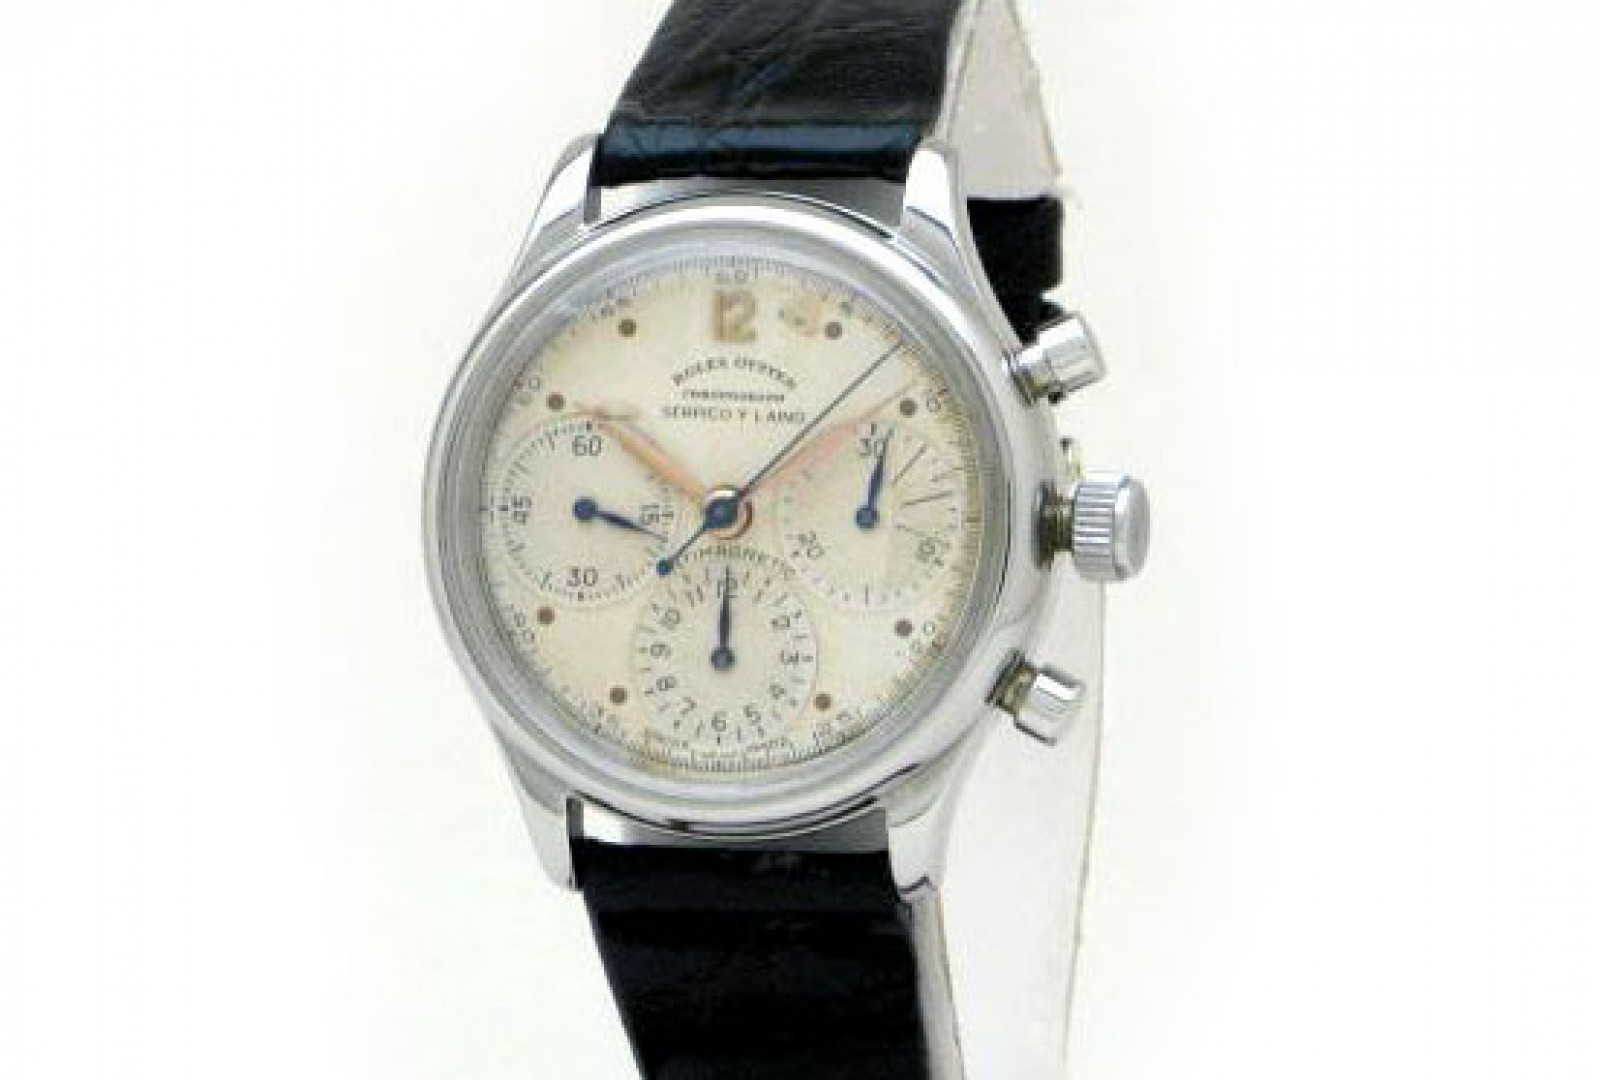 Vintage Rolex Chronograph 4048 Steel with White Dial